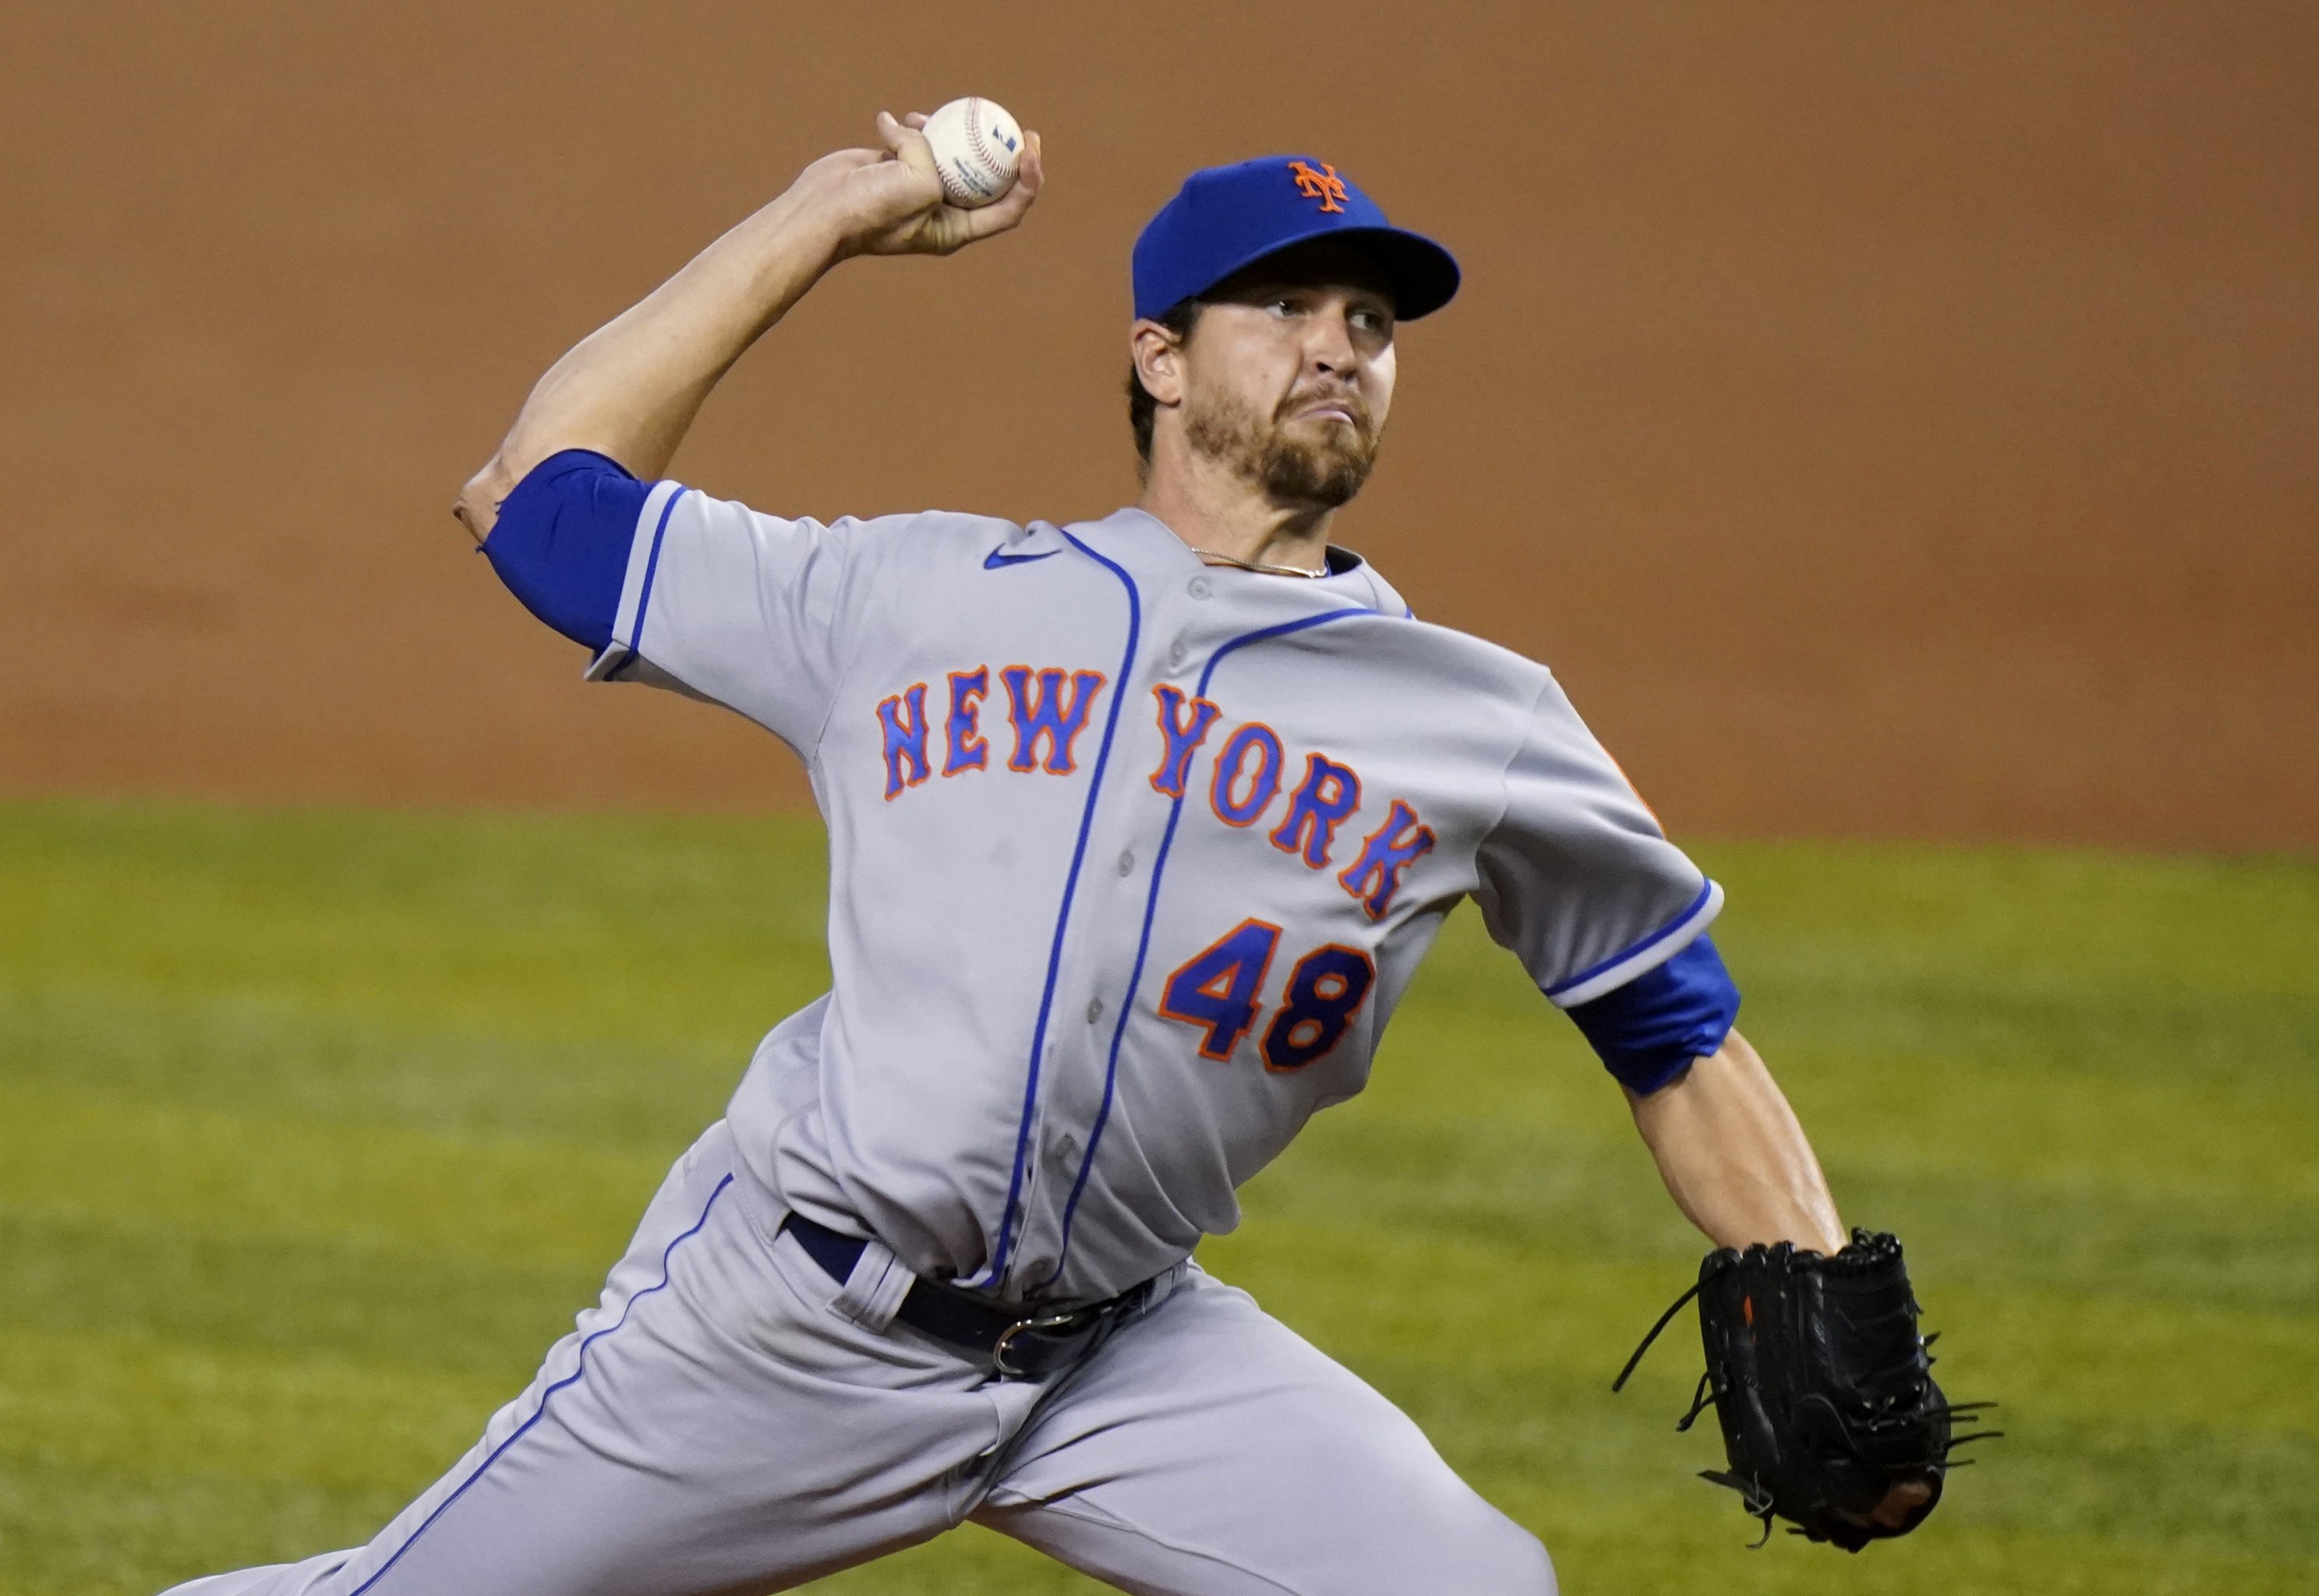 The Stages of Jacob deGrom's Career, Through the Eyes of Nick